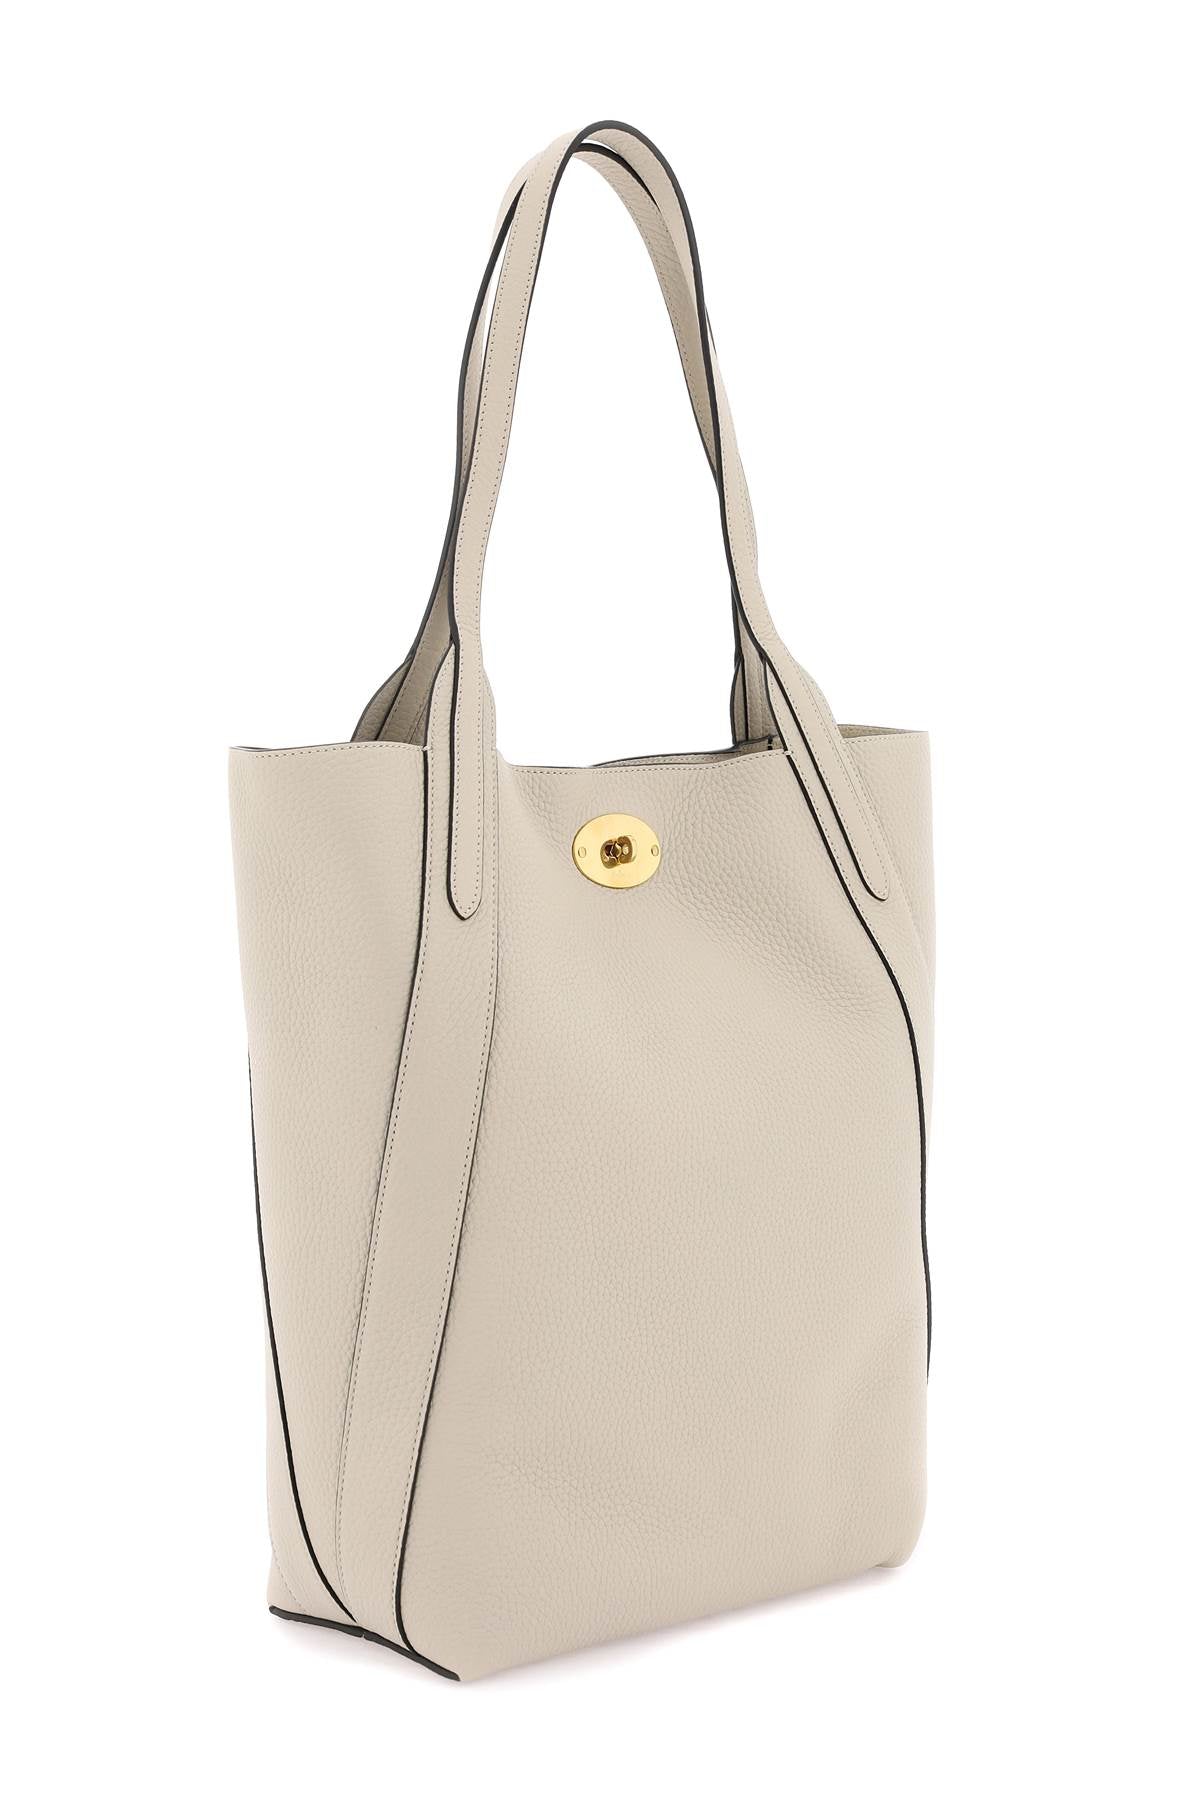 Mulberry grained leather bayswater tote bag-2